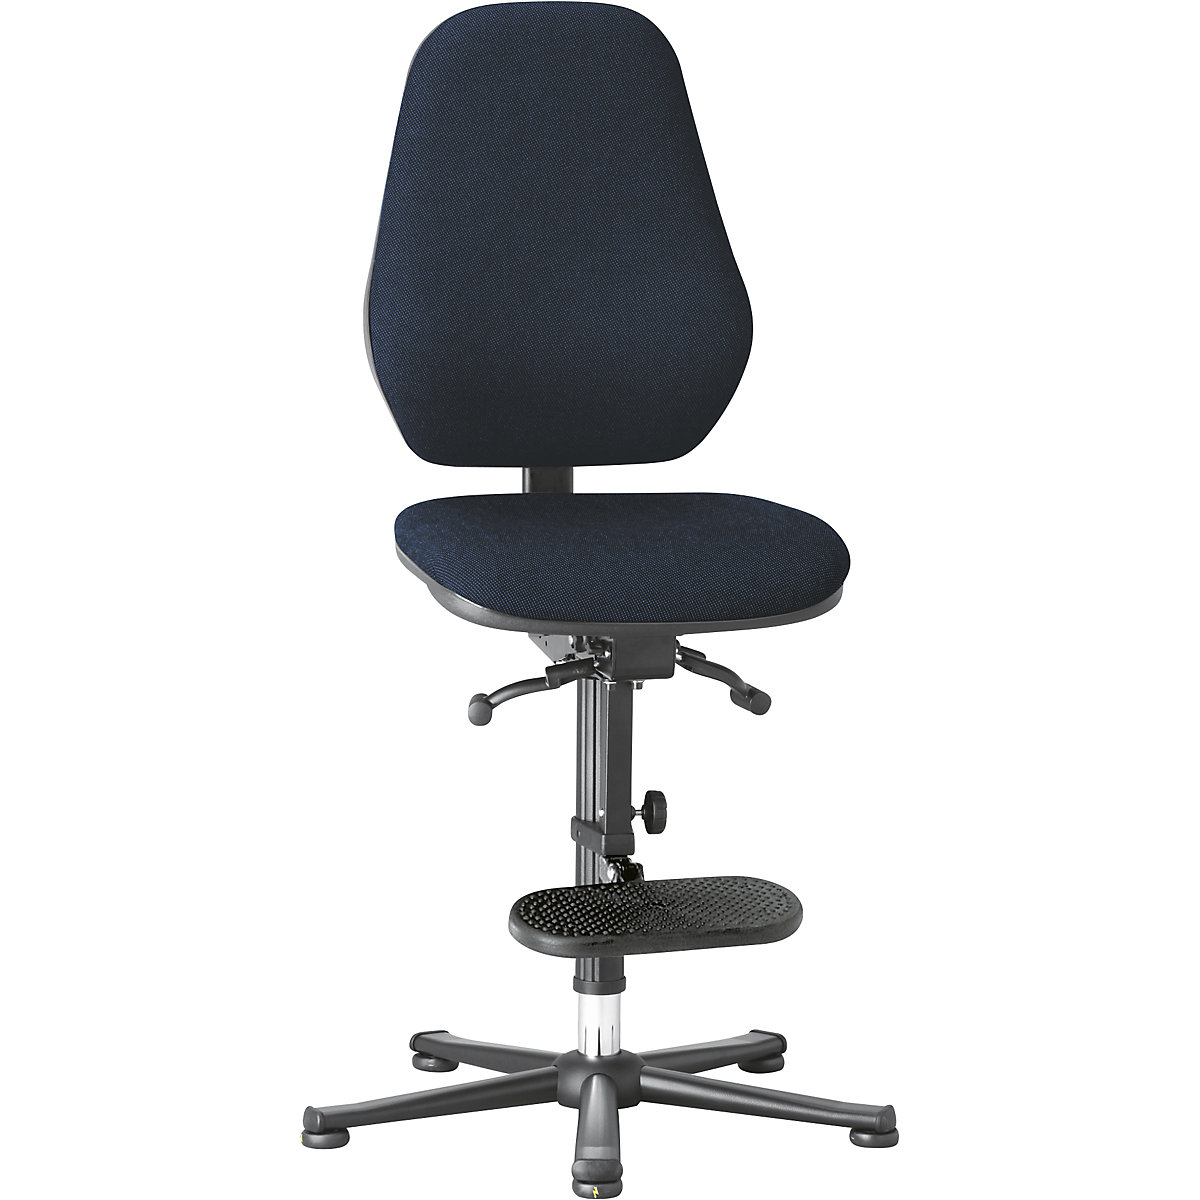 Industrial swivel chair – bimos, with ESD protection, gas spring, floor glides, step-up, blue fabric covering-7